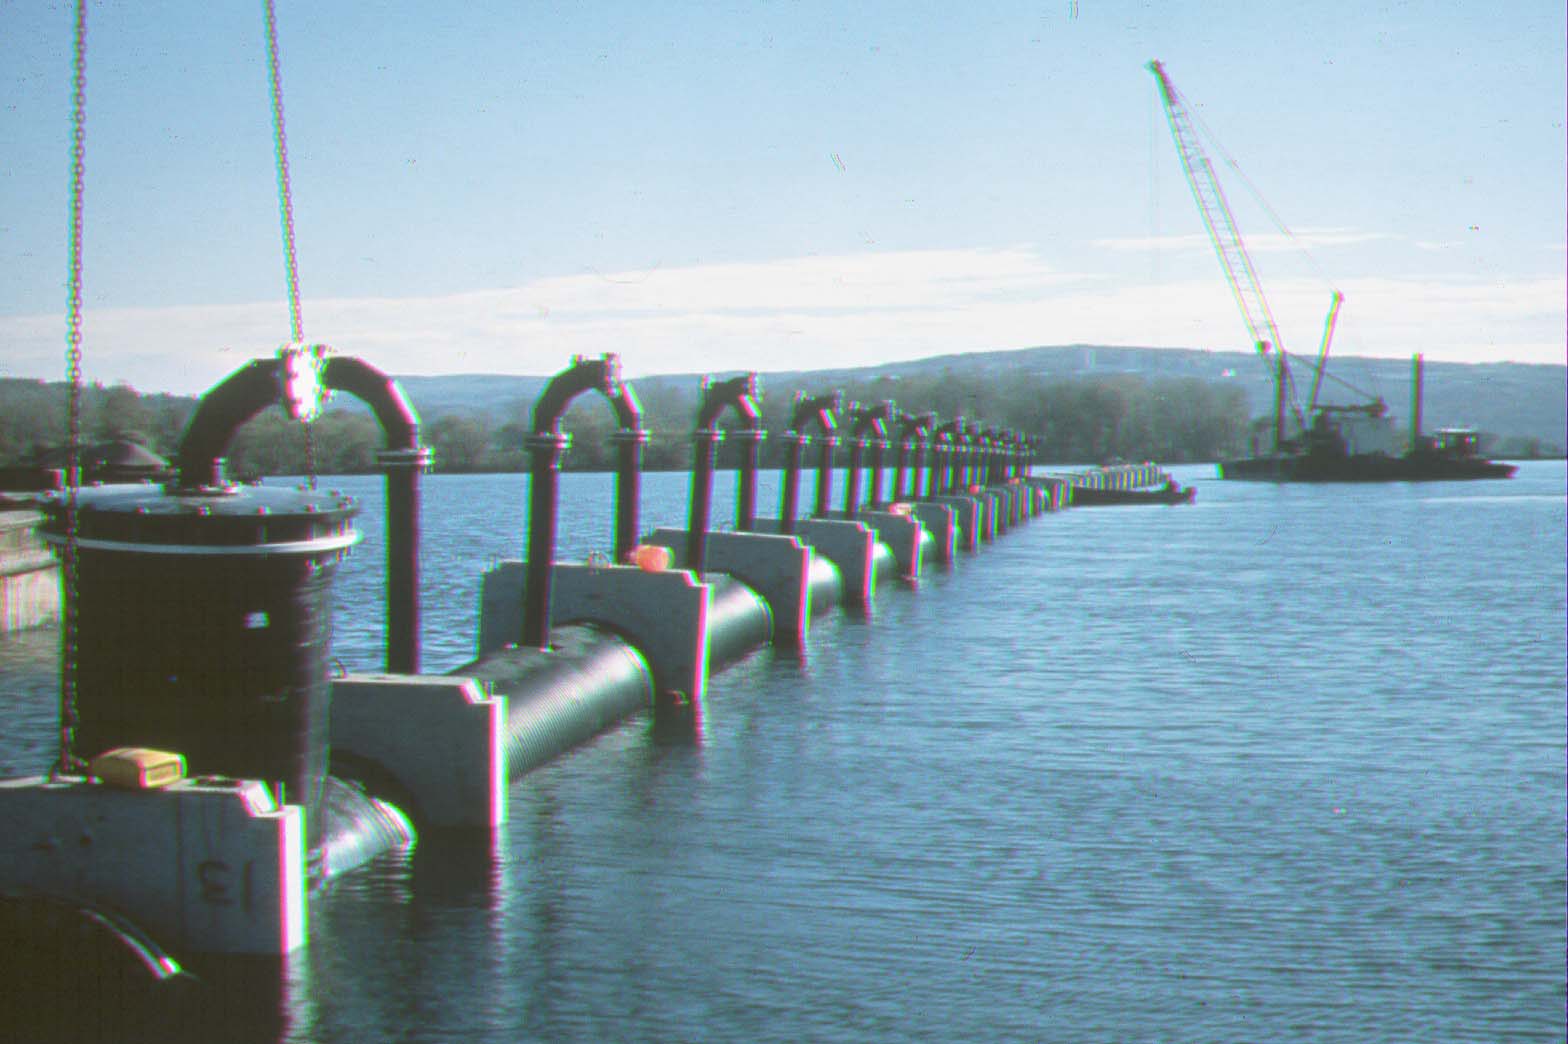 Multiport diffuser under construction on Lake Cayuga, New York.